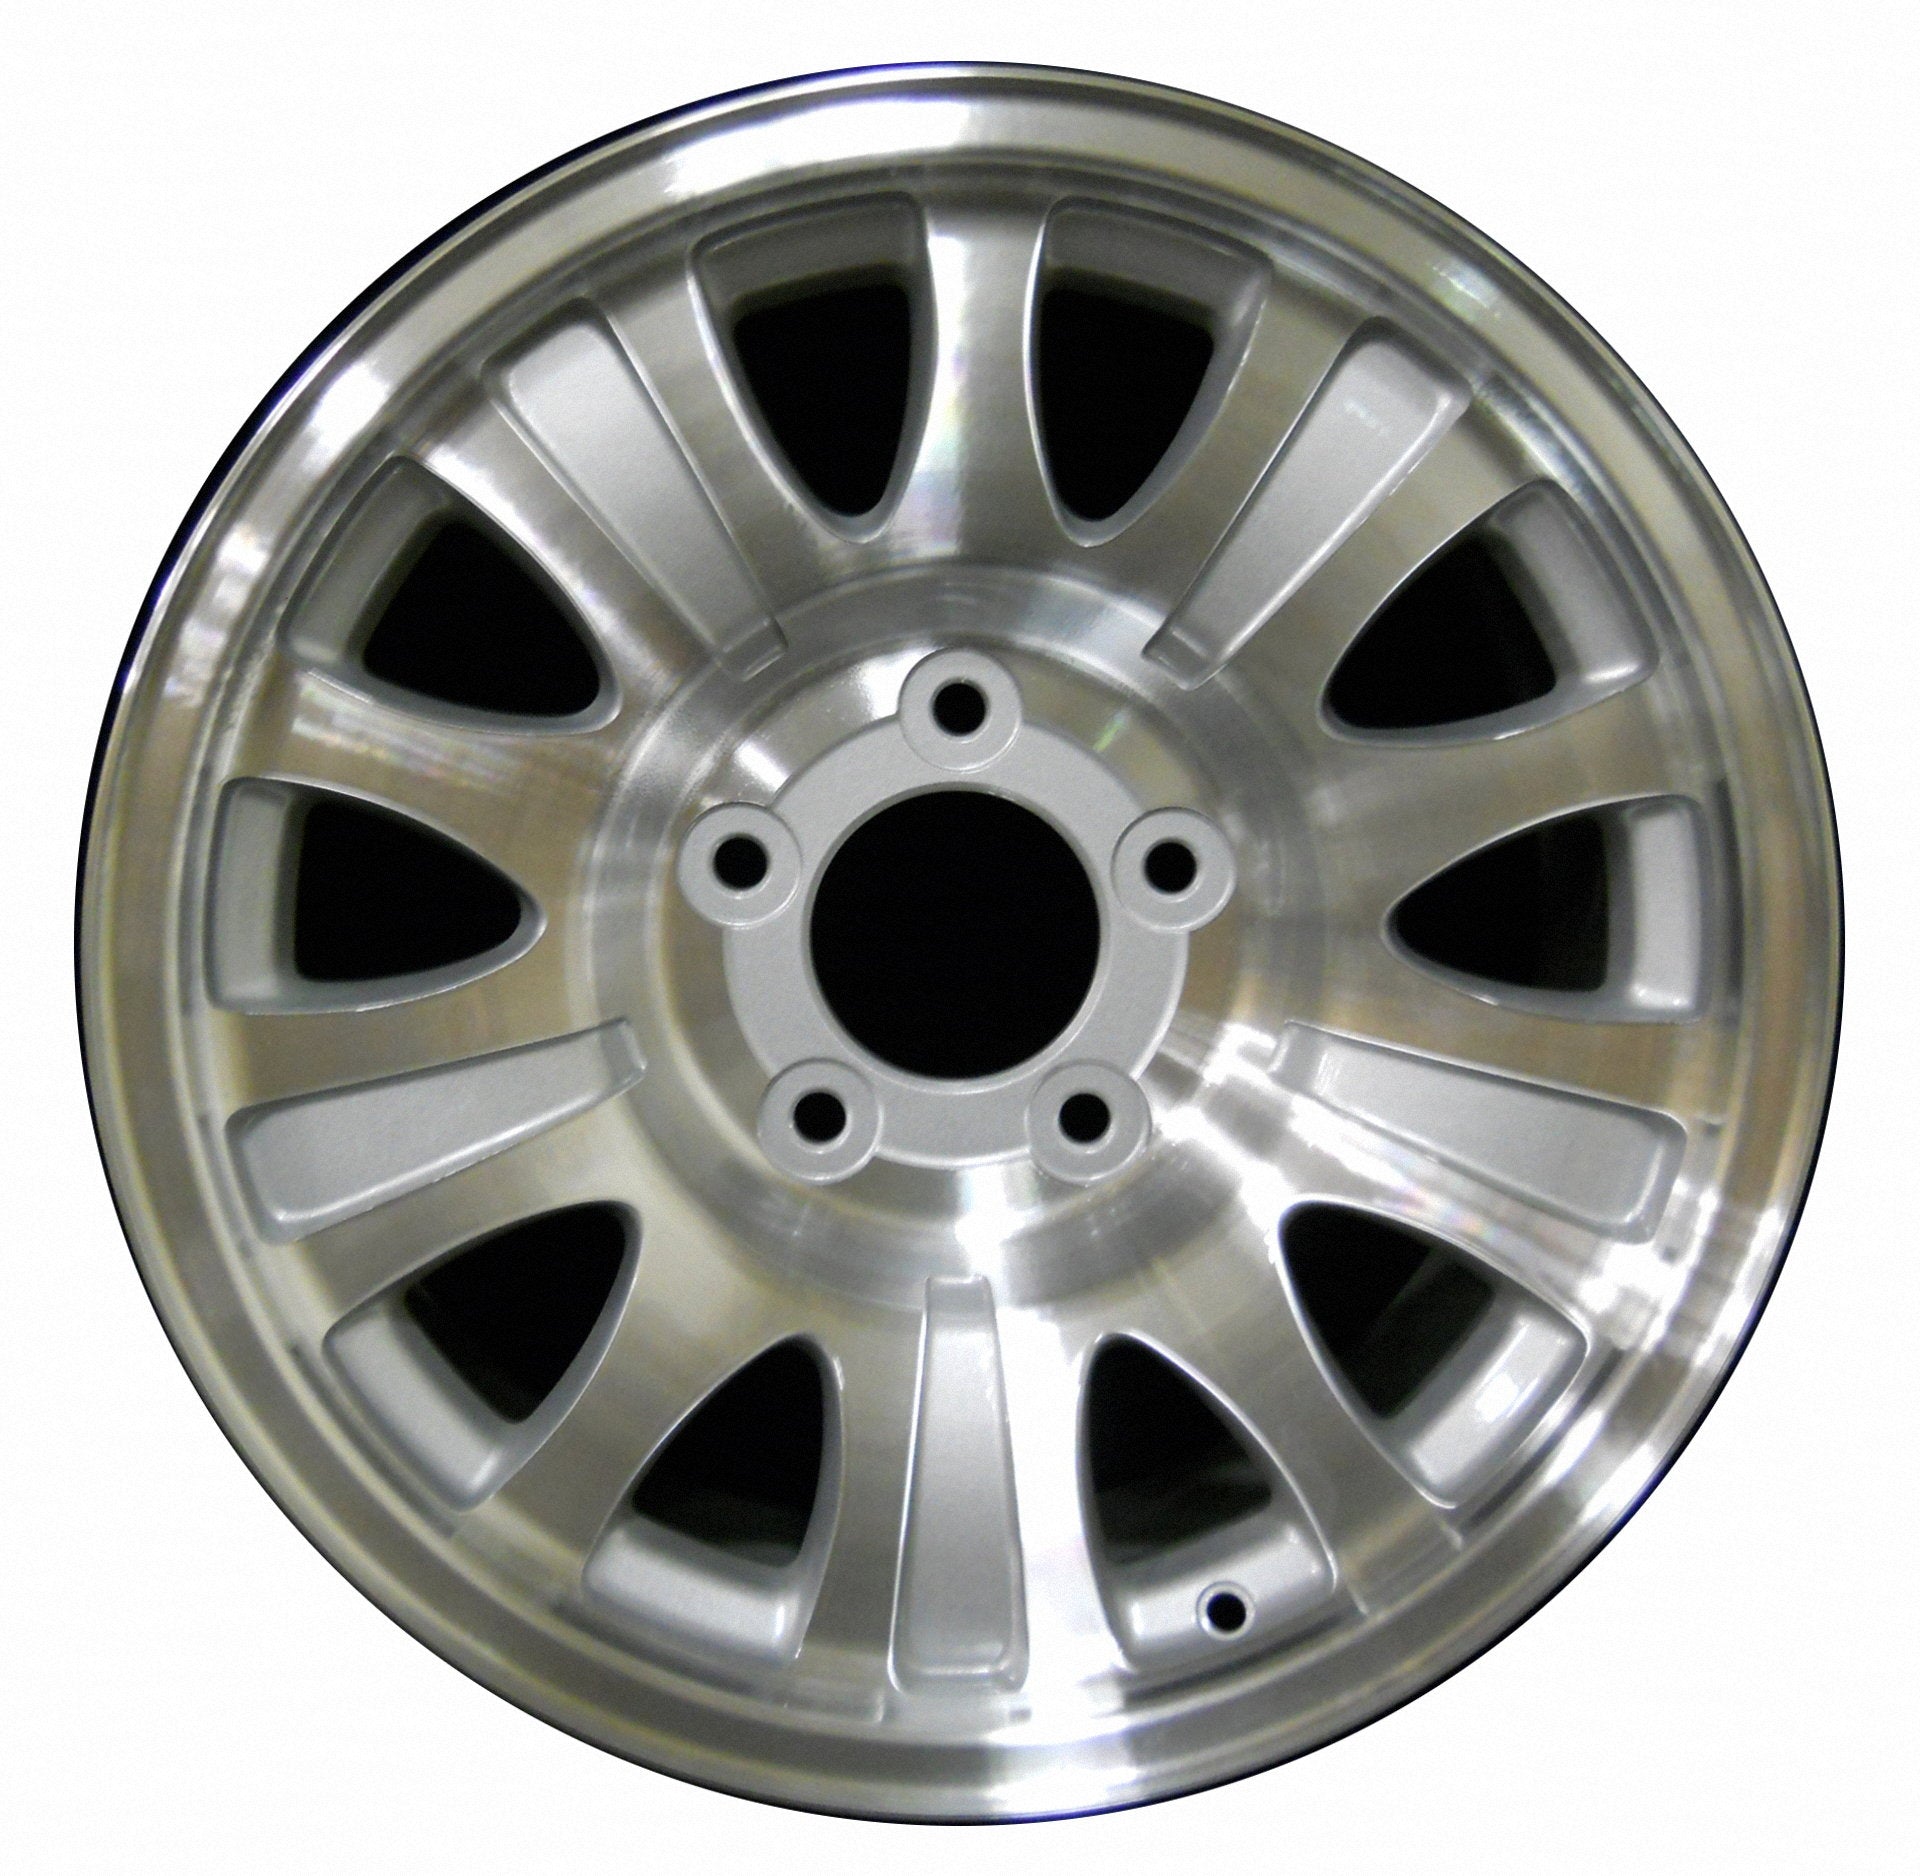 Ford F150 Truck  2000, 2001, 2002, 2003, 2004 Factory OEM Car Wheel Size 17x7.5 Alloy WAO.3412.PS02.MA